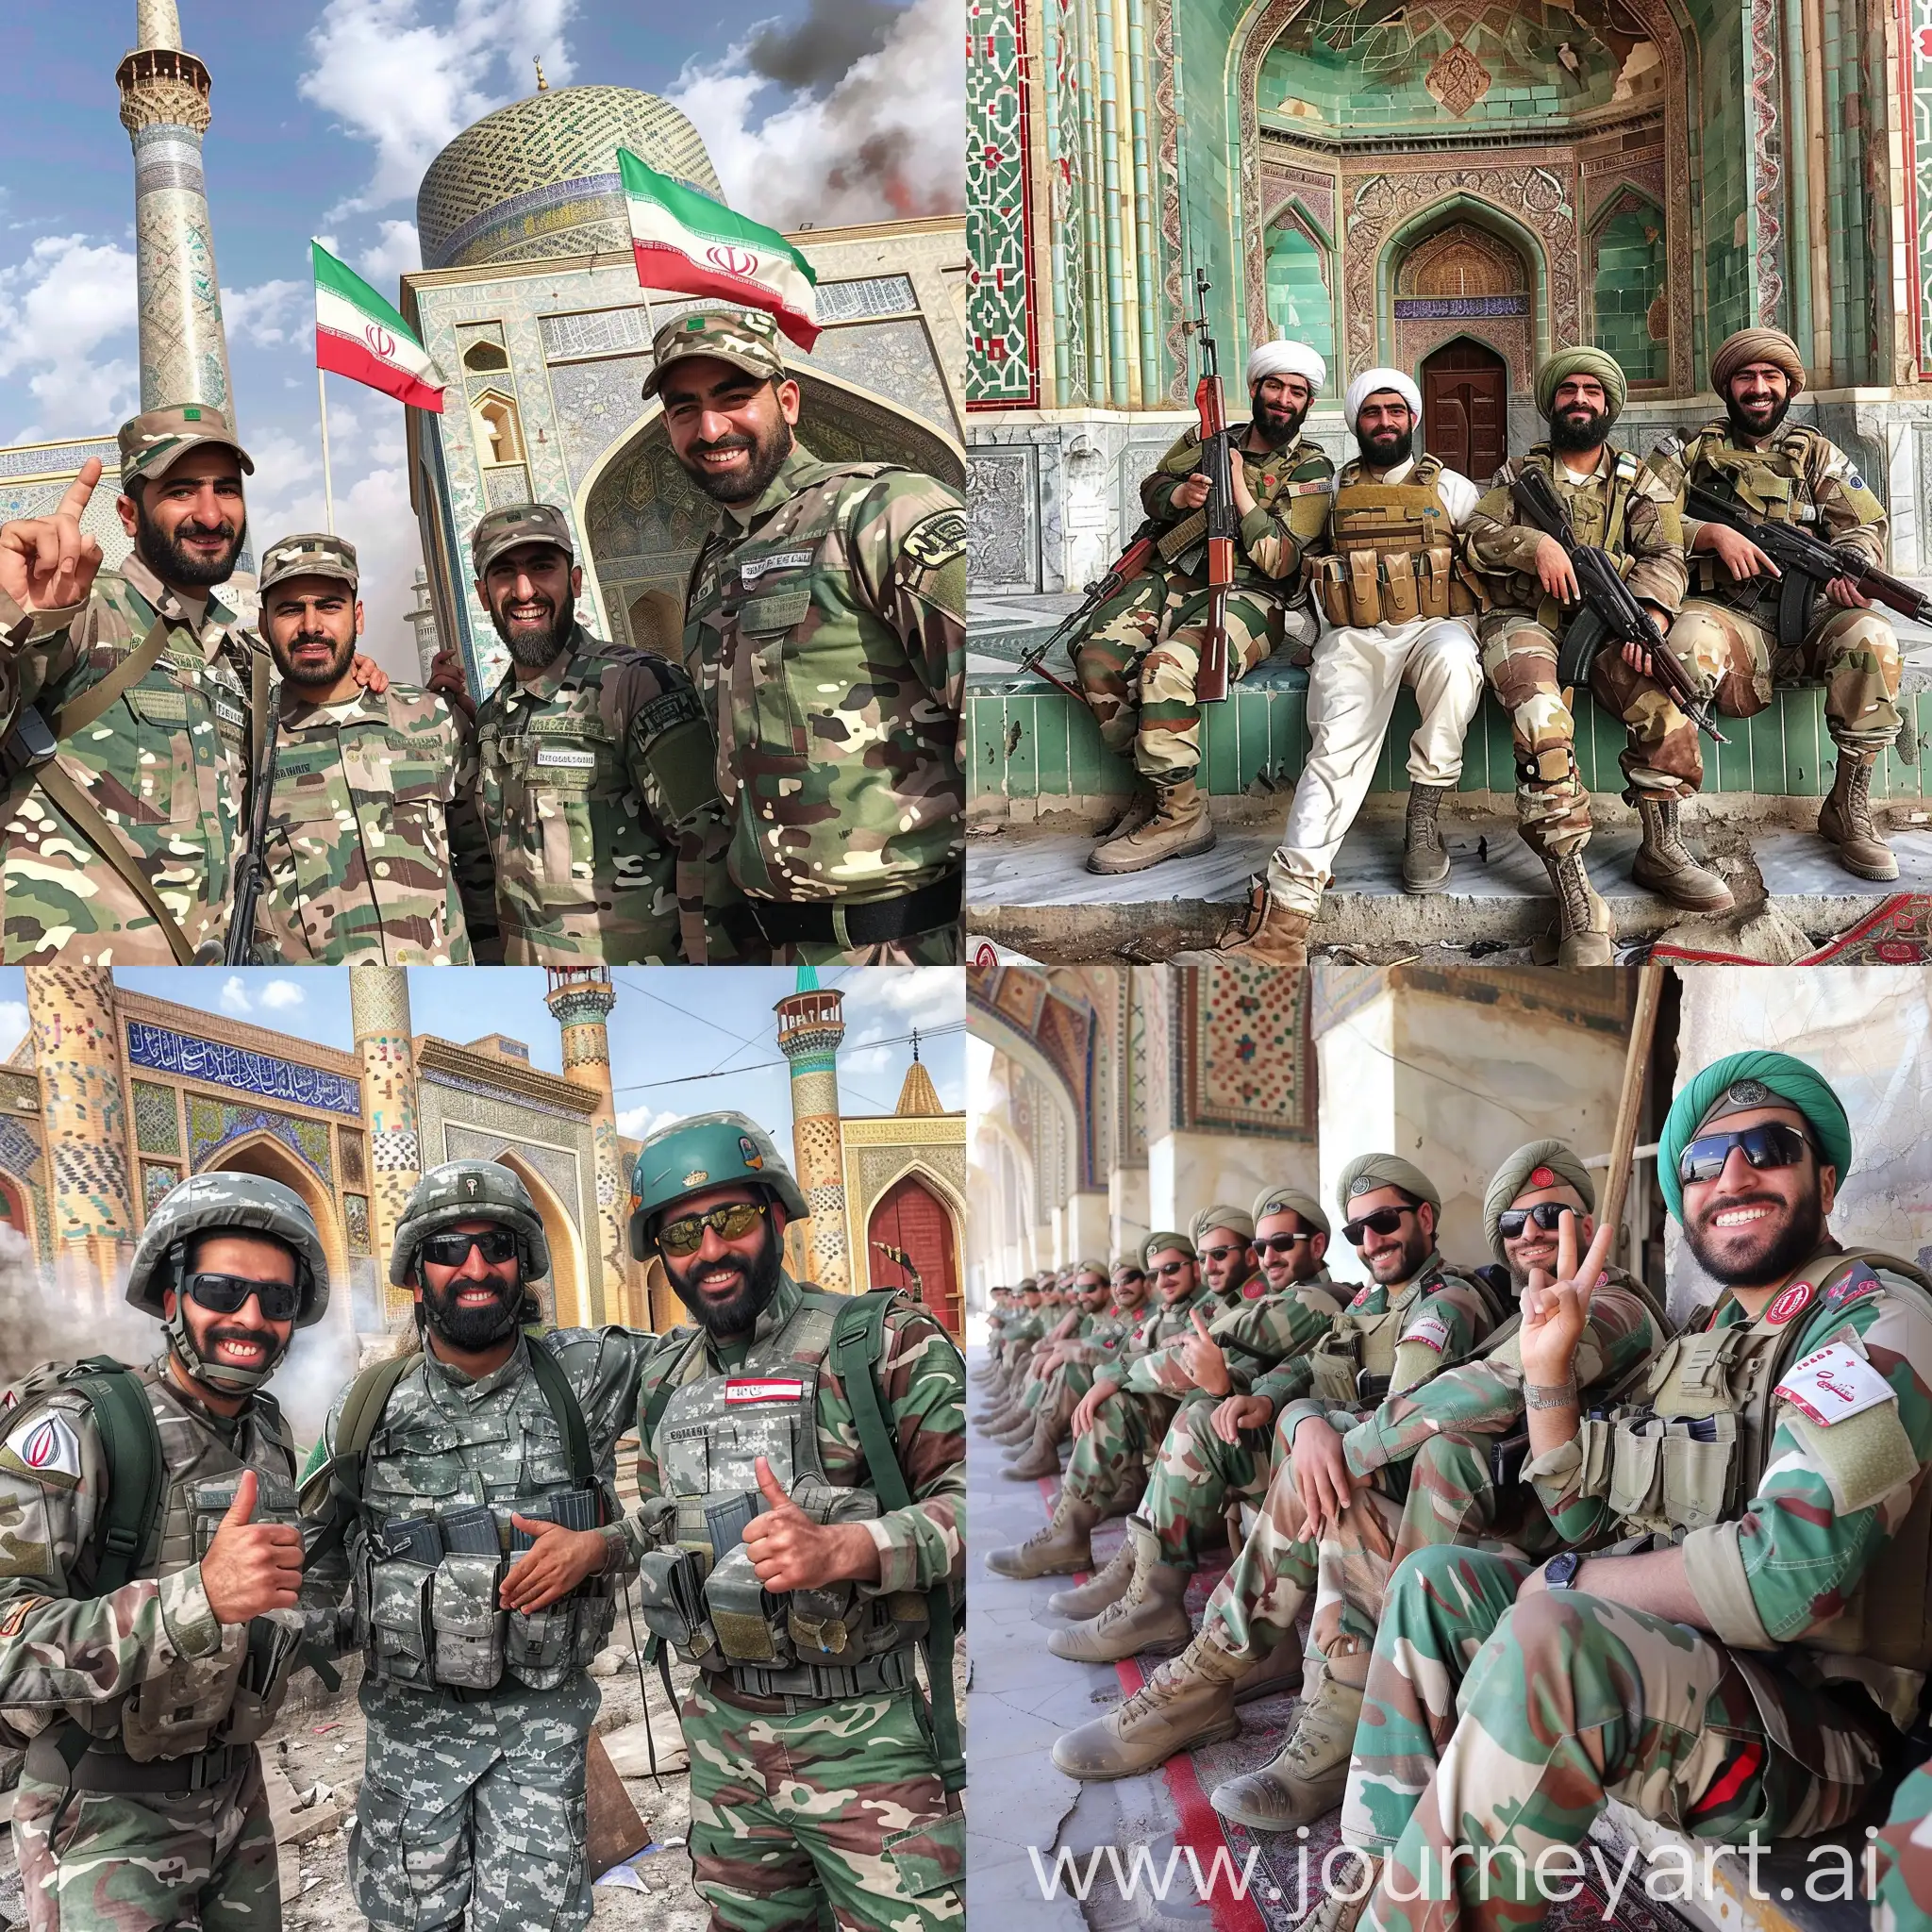 Iranian soldiers next to Khorramshahr mosque happily, the atmosphere of the epic effect, the use of green, white and red colors